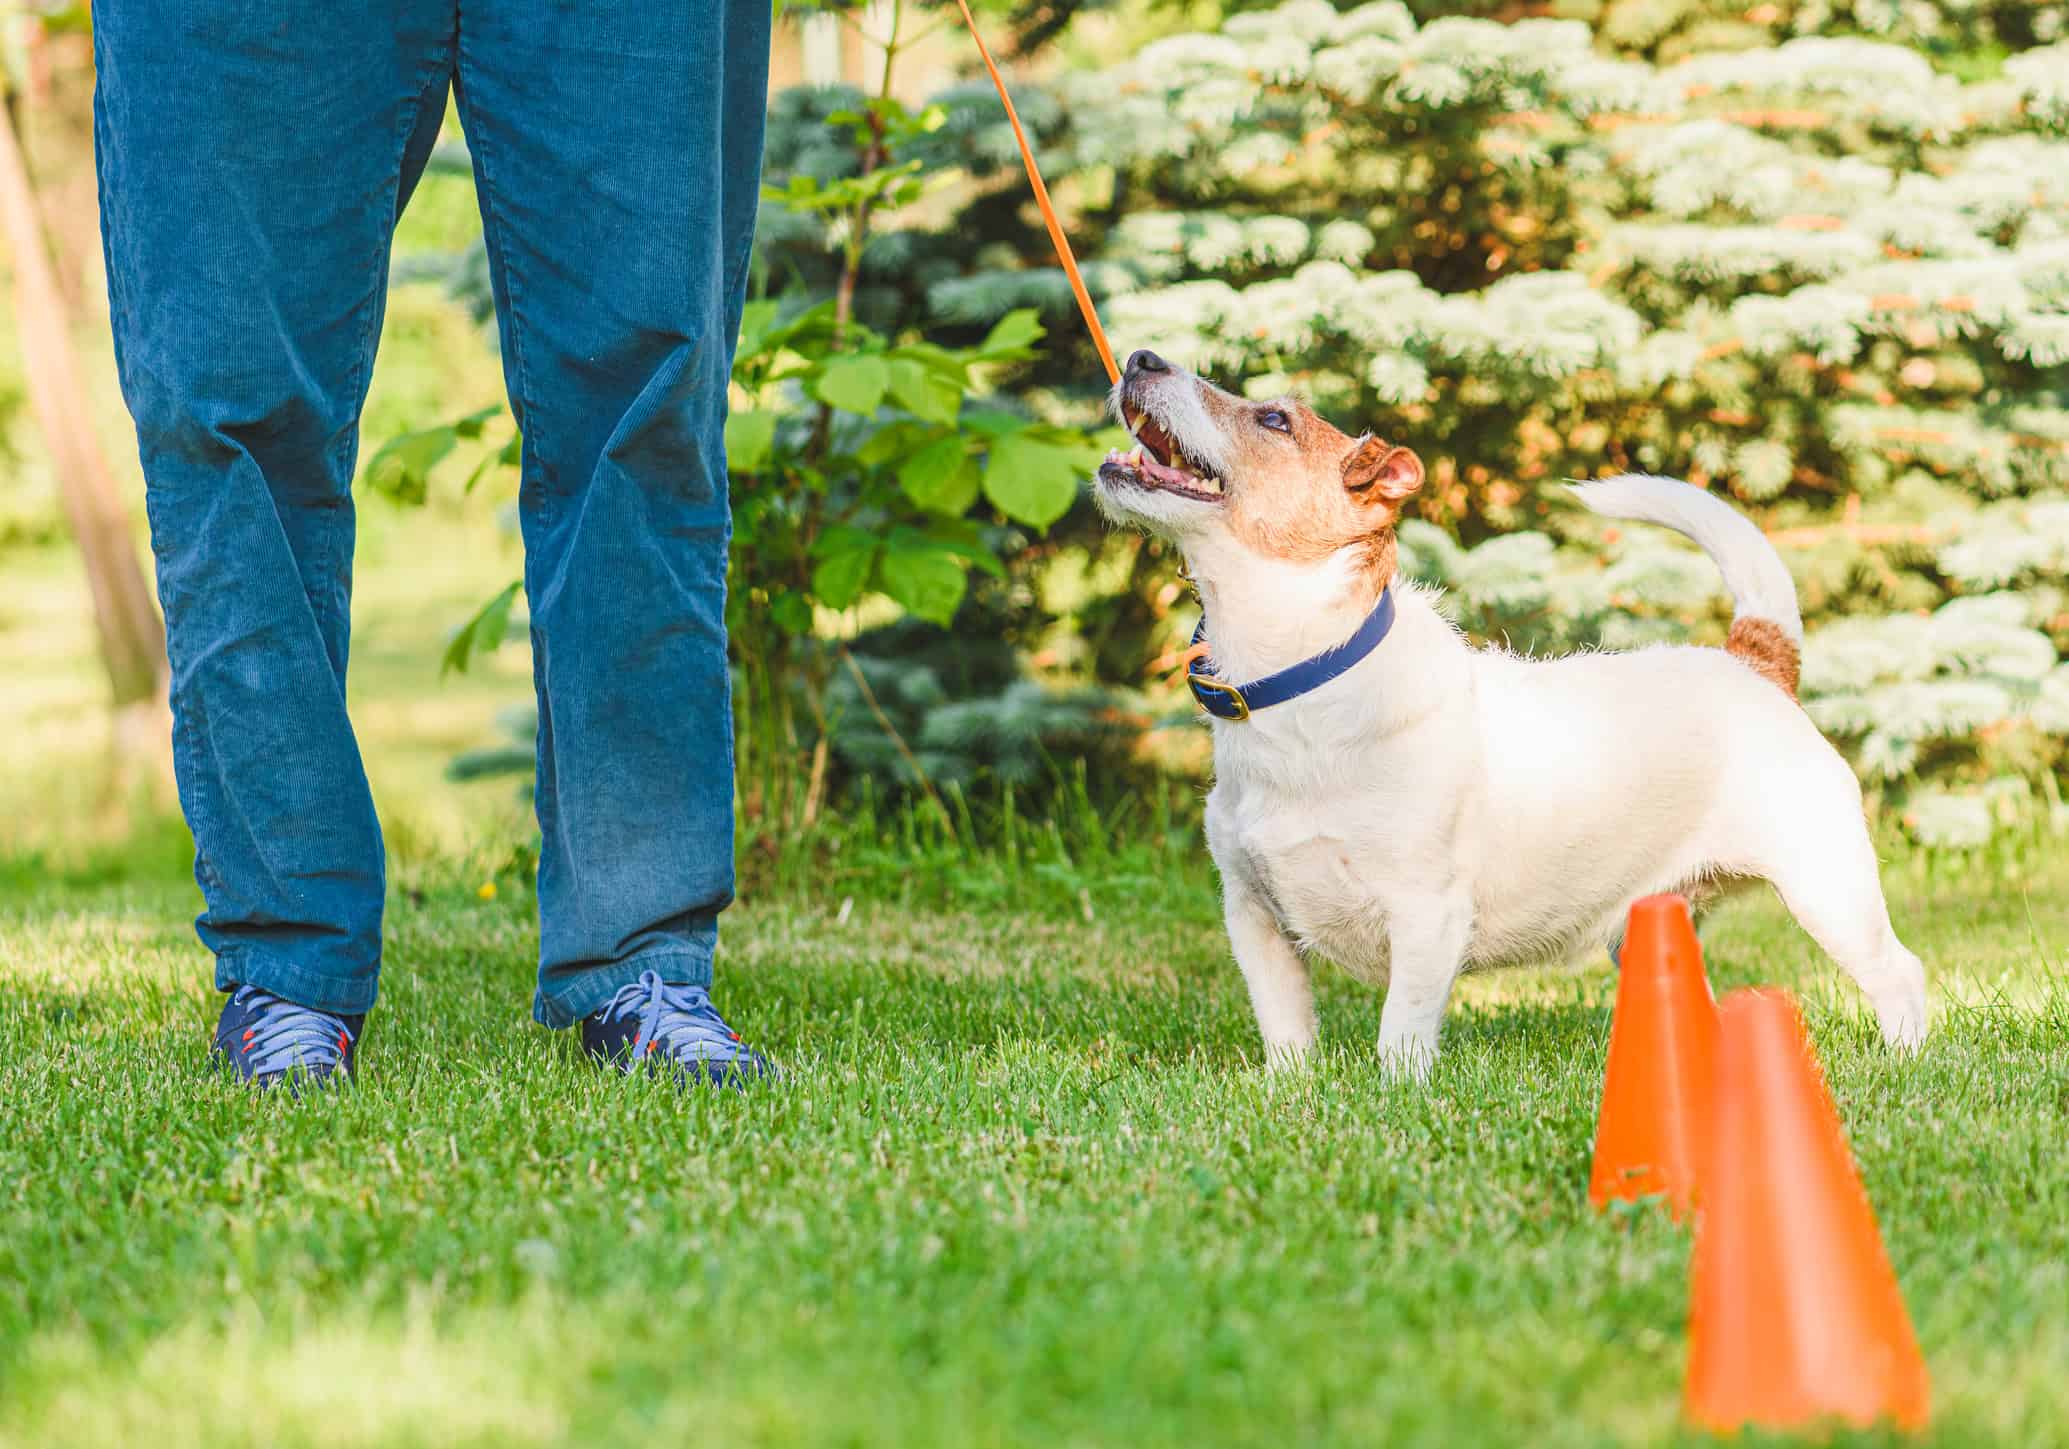 how to find a good dog trainer